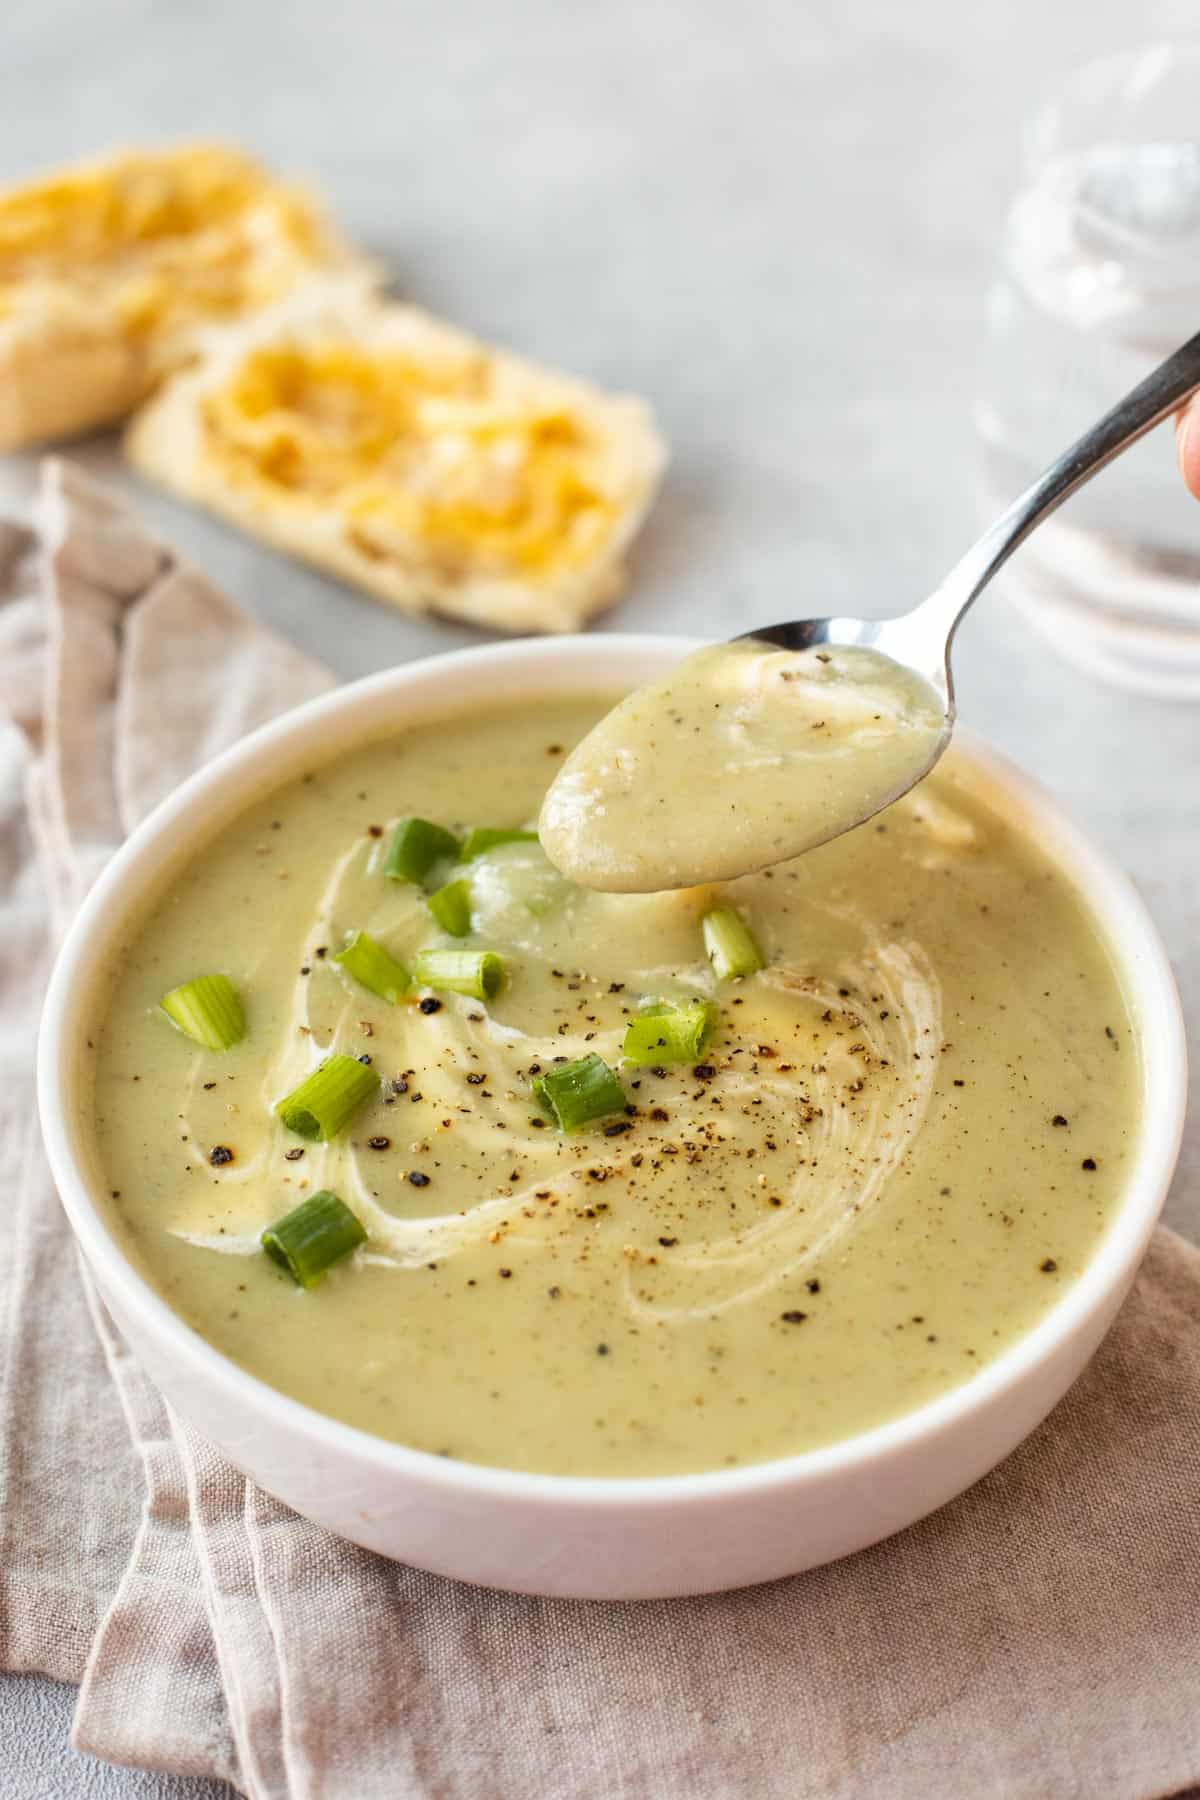 A spoon taking a scoop of a creamy potato and spring onion soup.